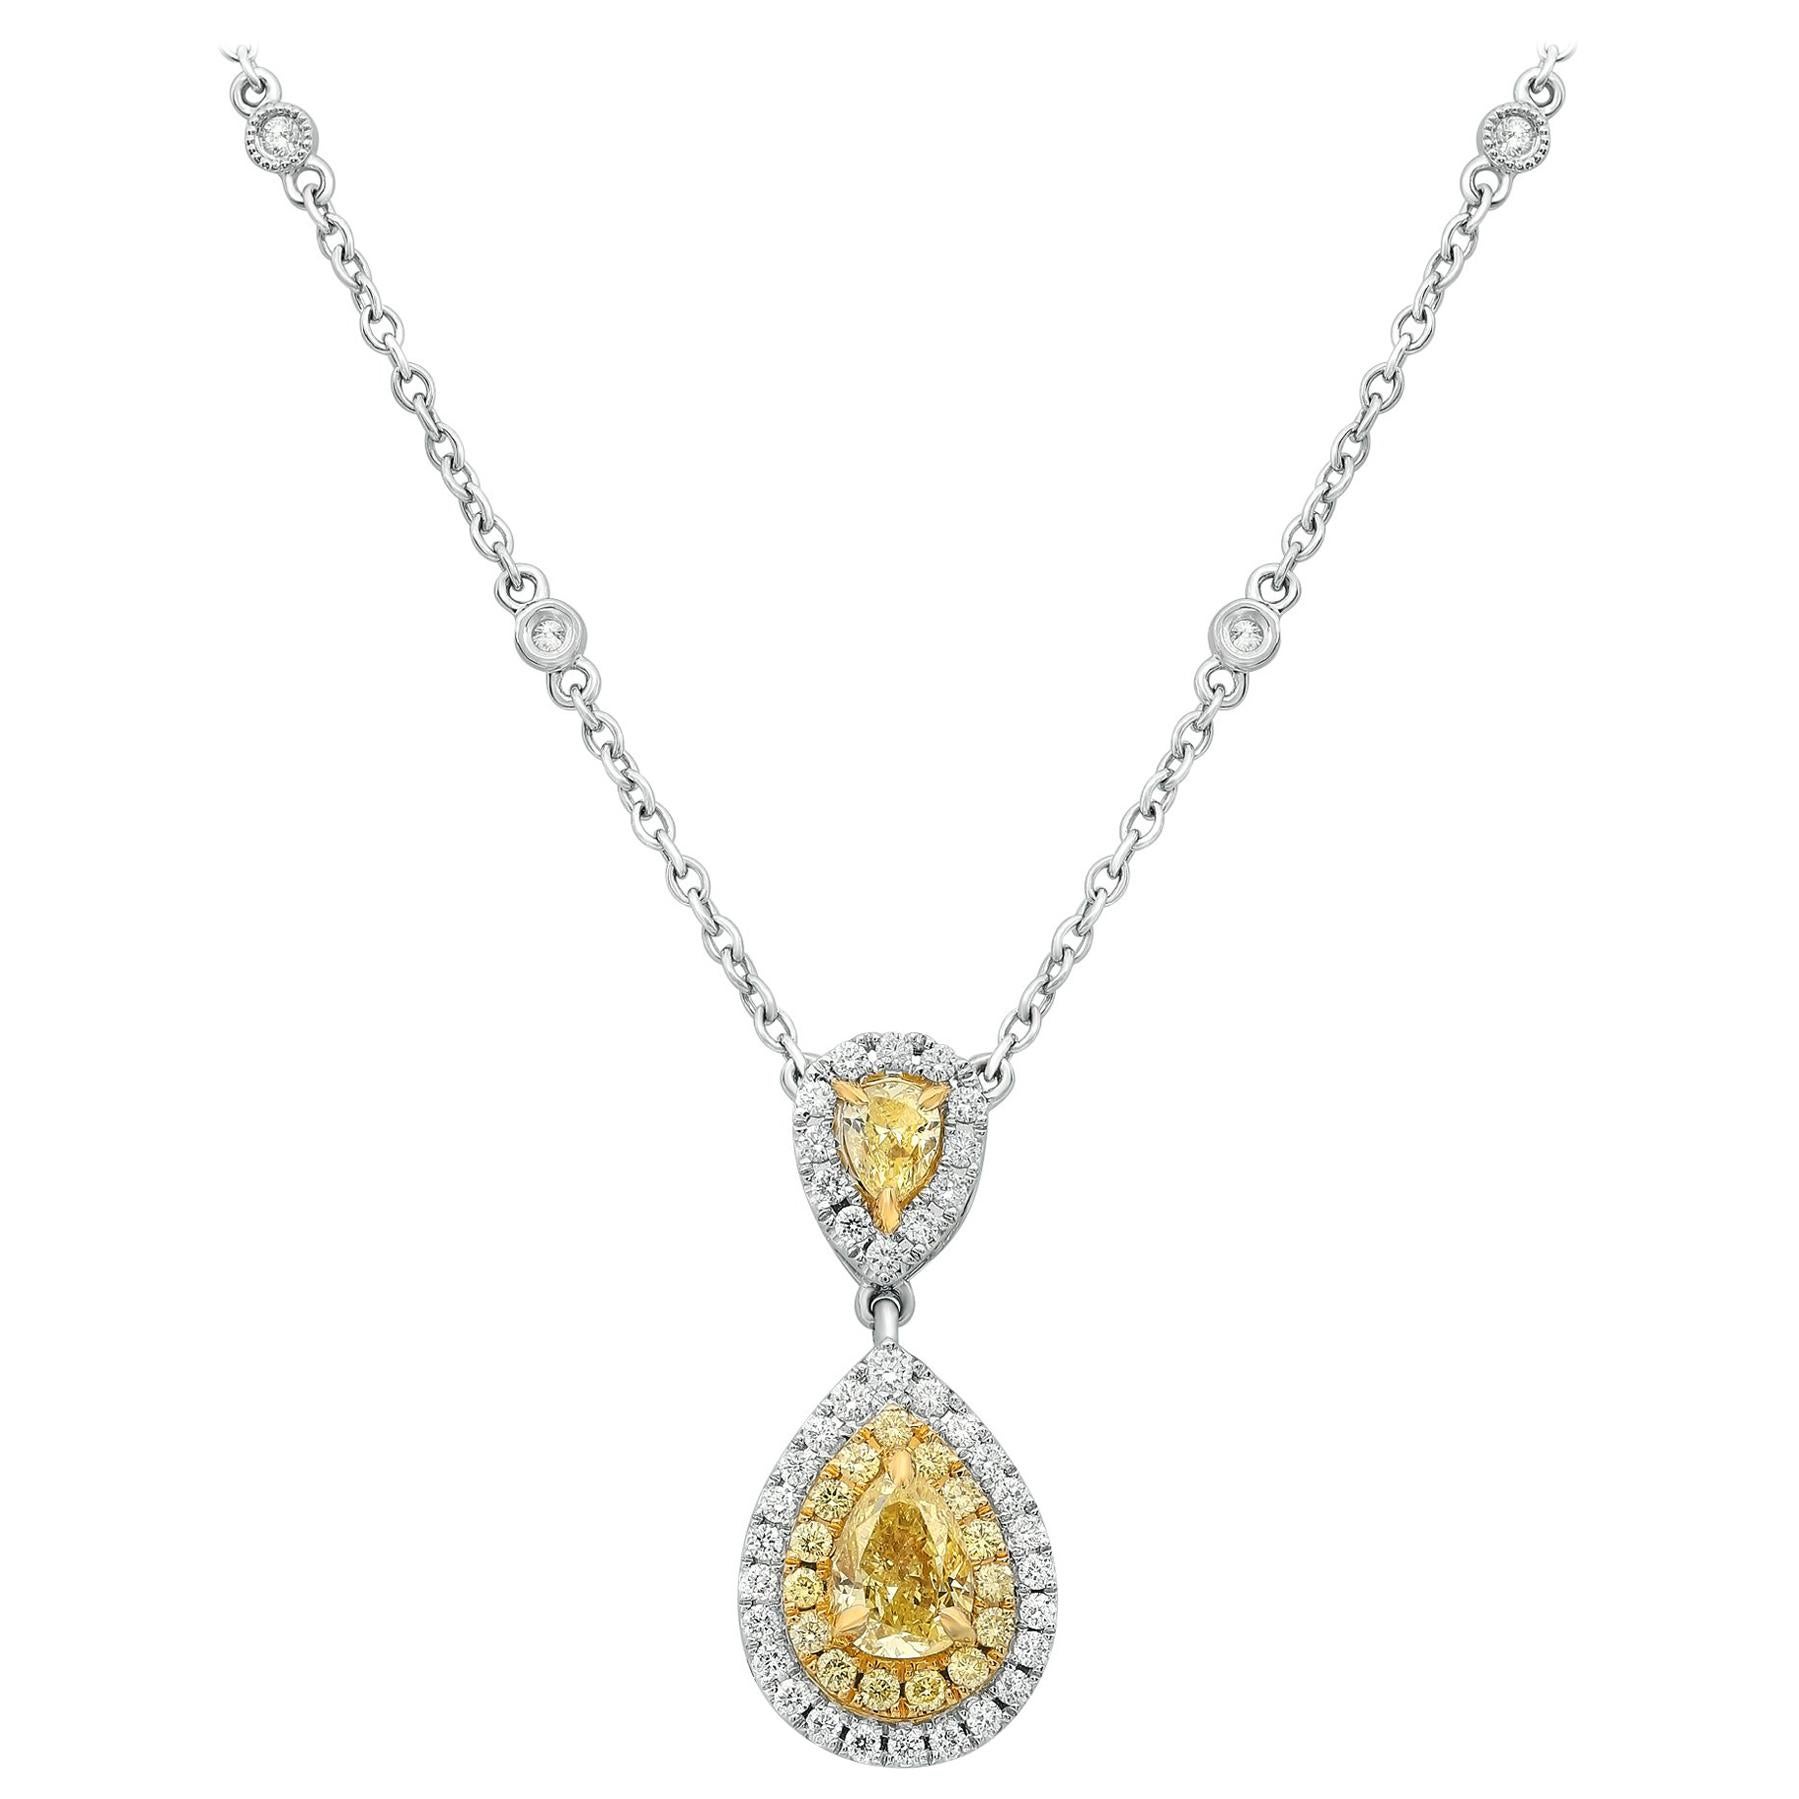 Fancy Yellow and White Diamond Pear Shaped Pendant Set in 18 Karat Gold